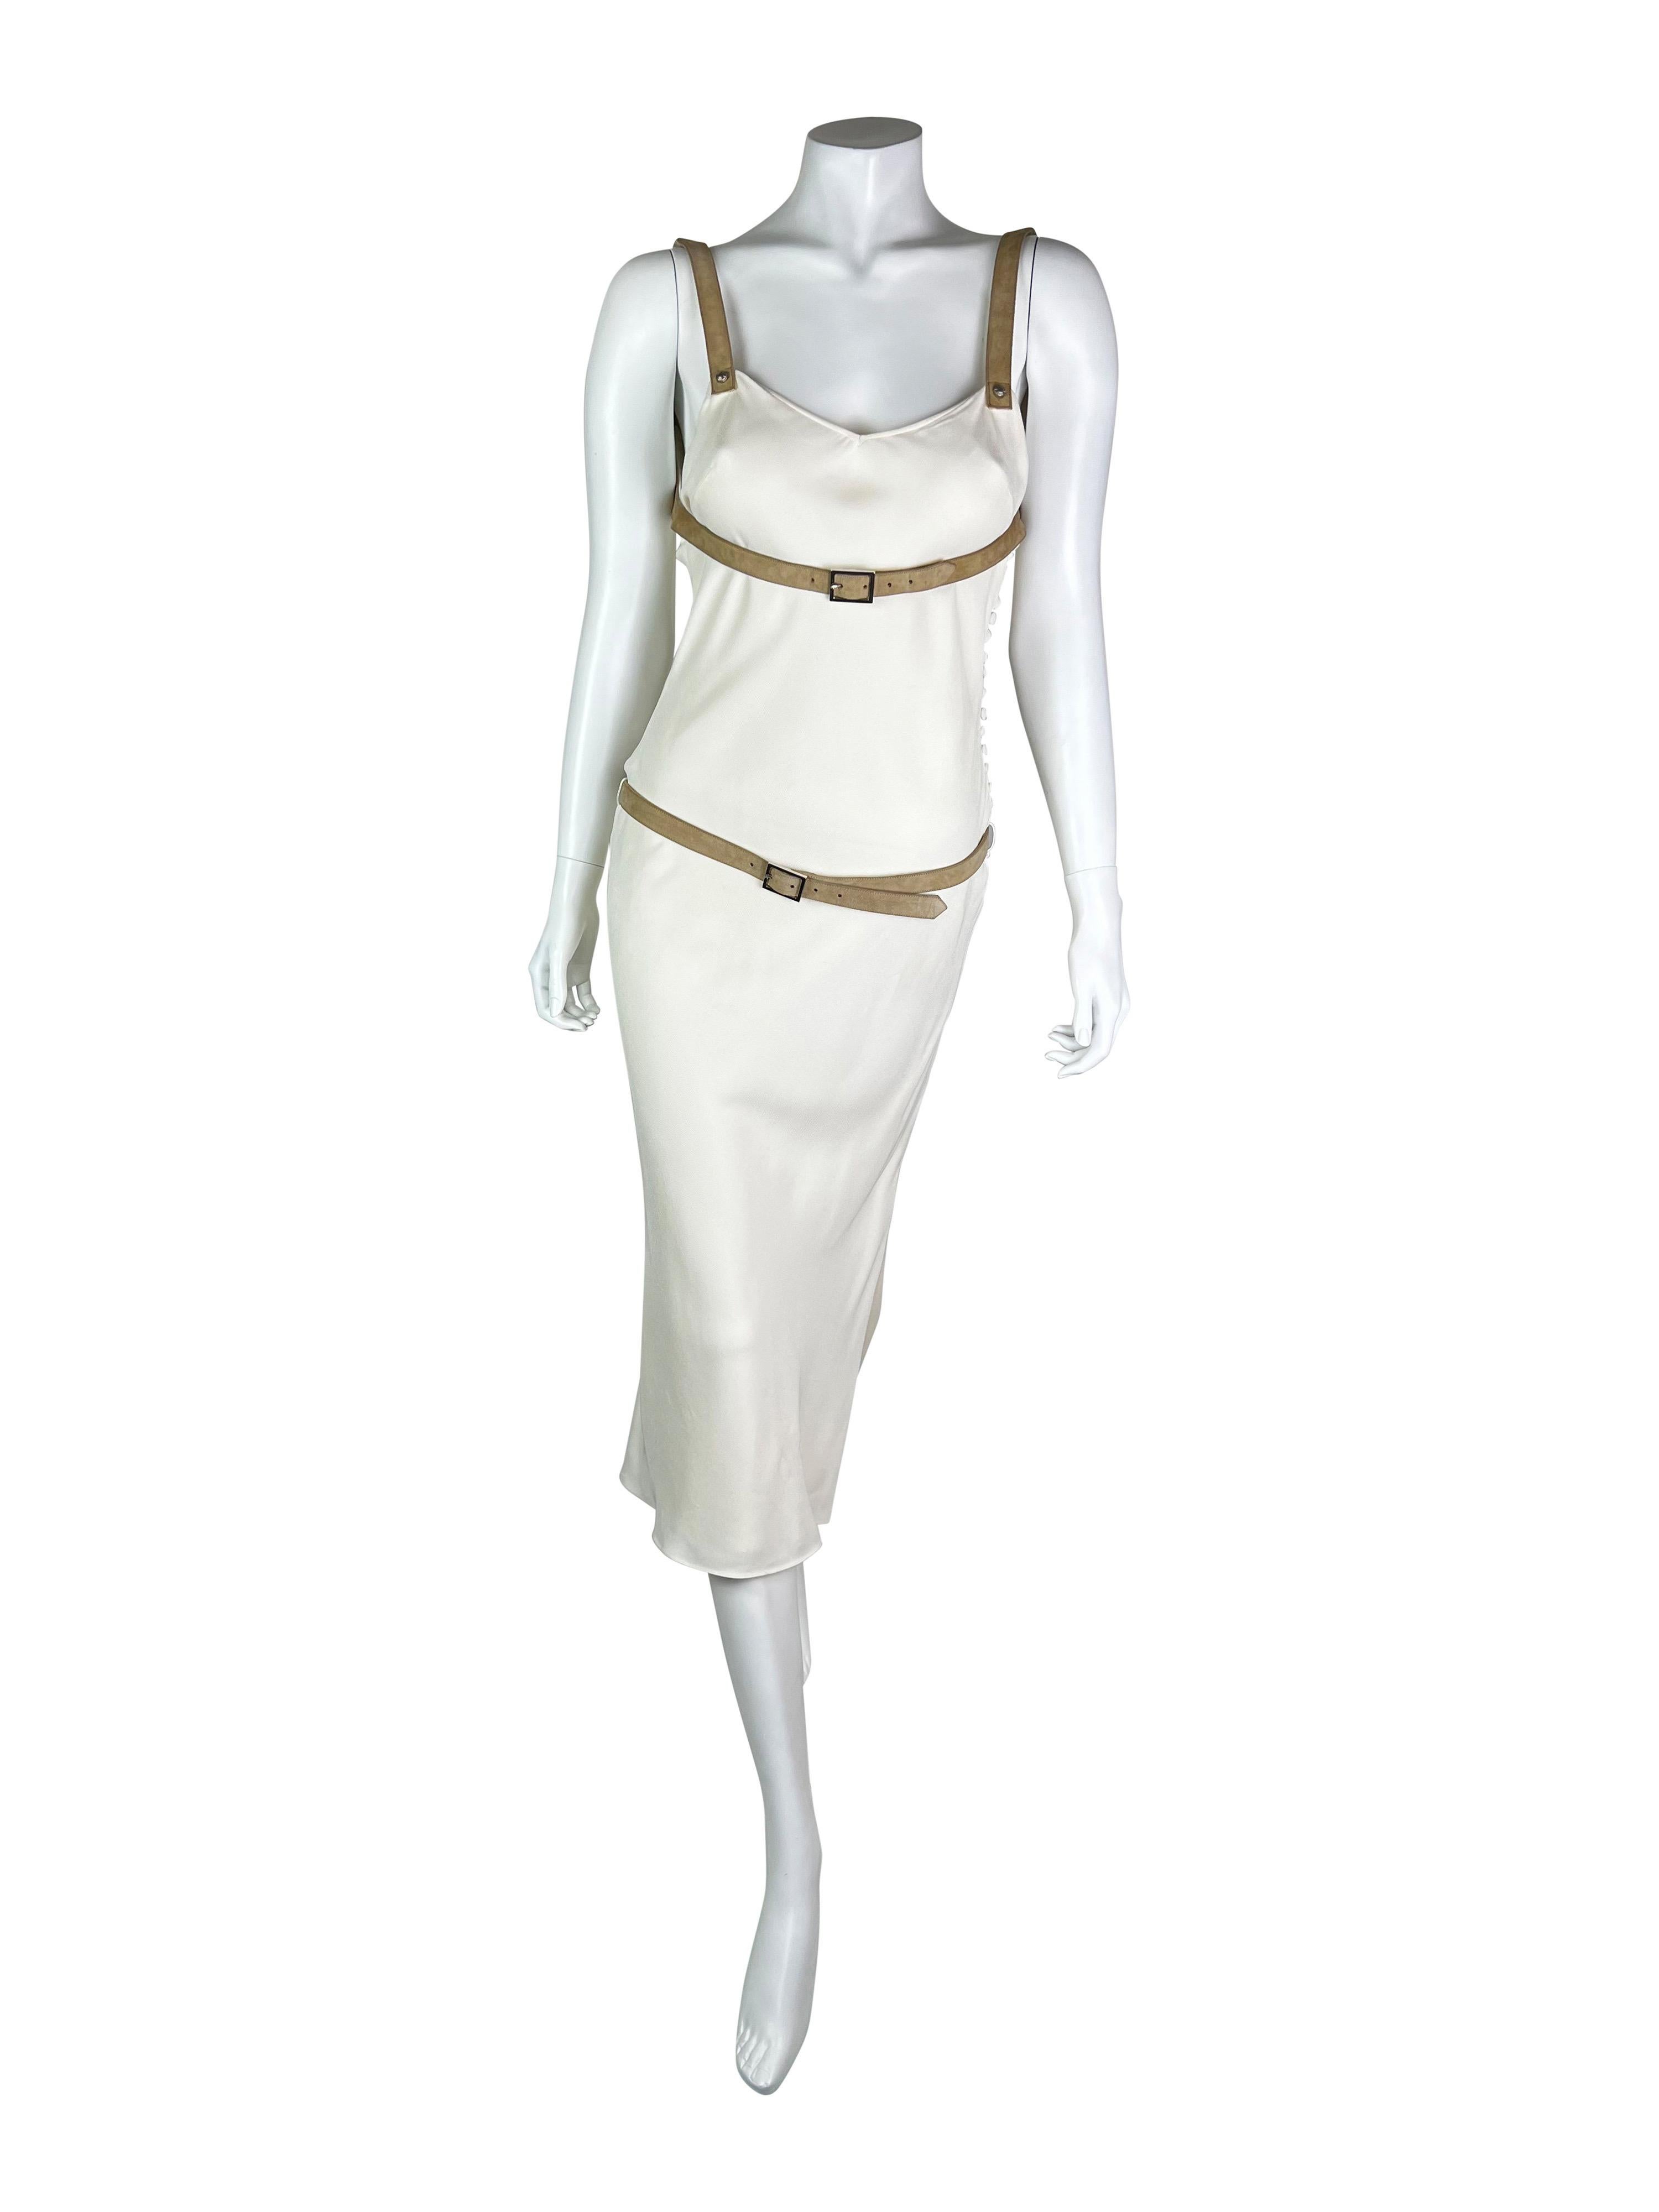 Women's Dior Spring 2001 Dress with Leather Belts